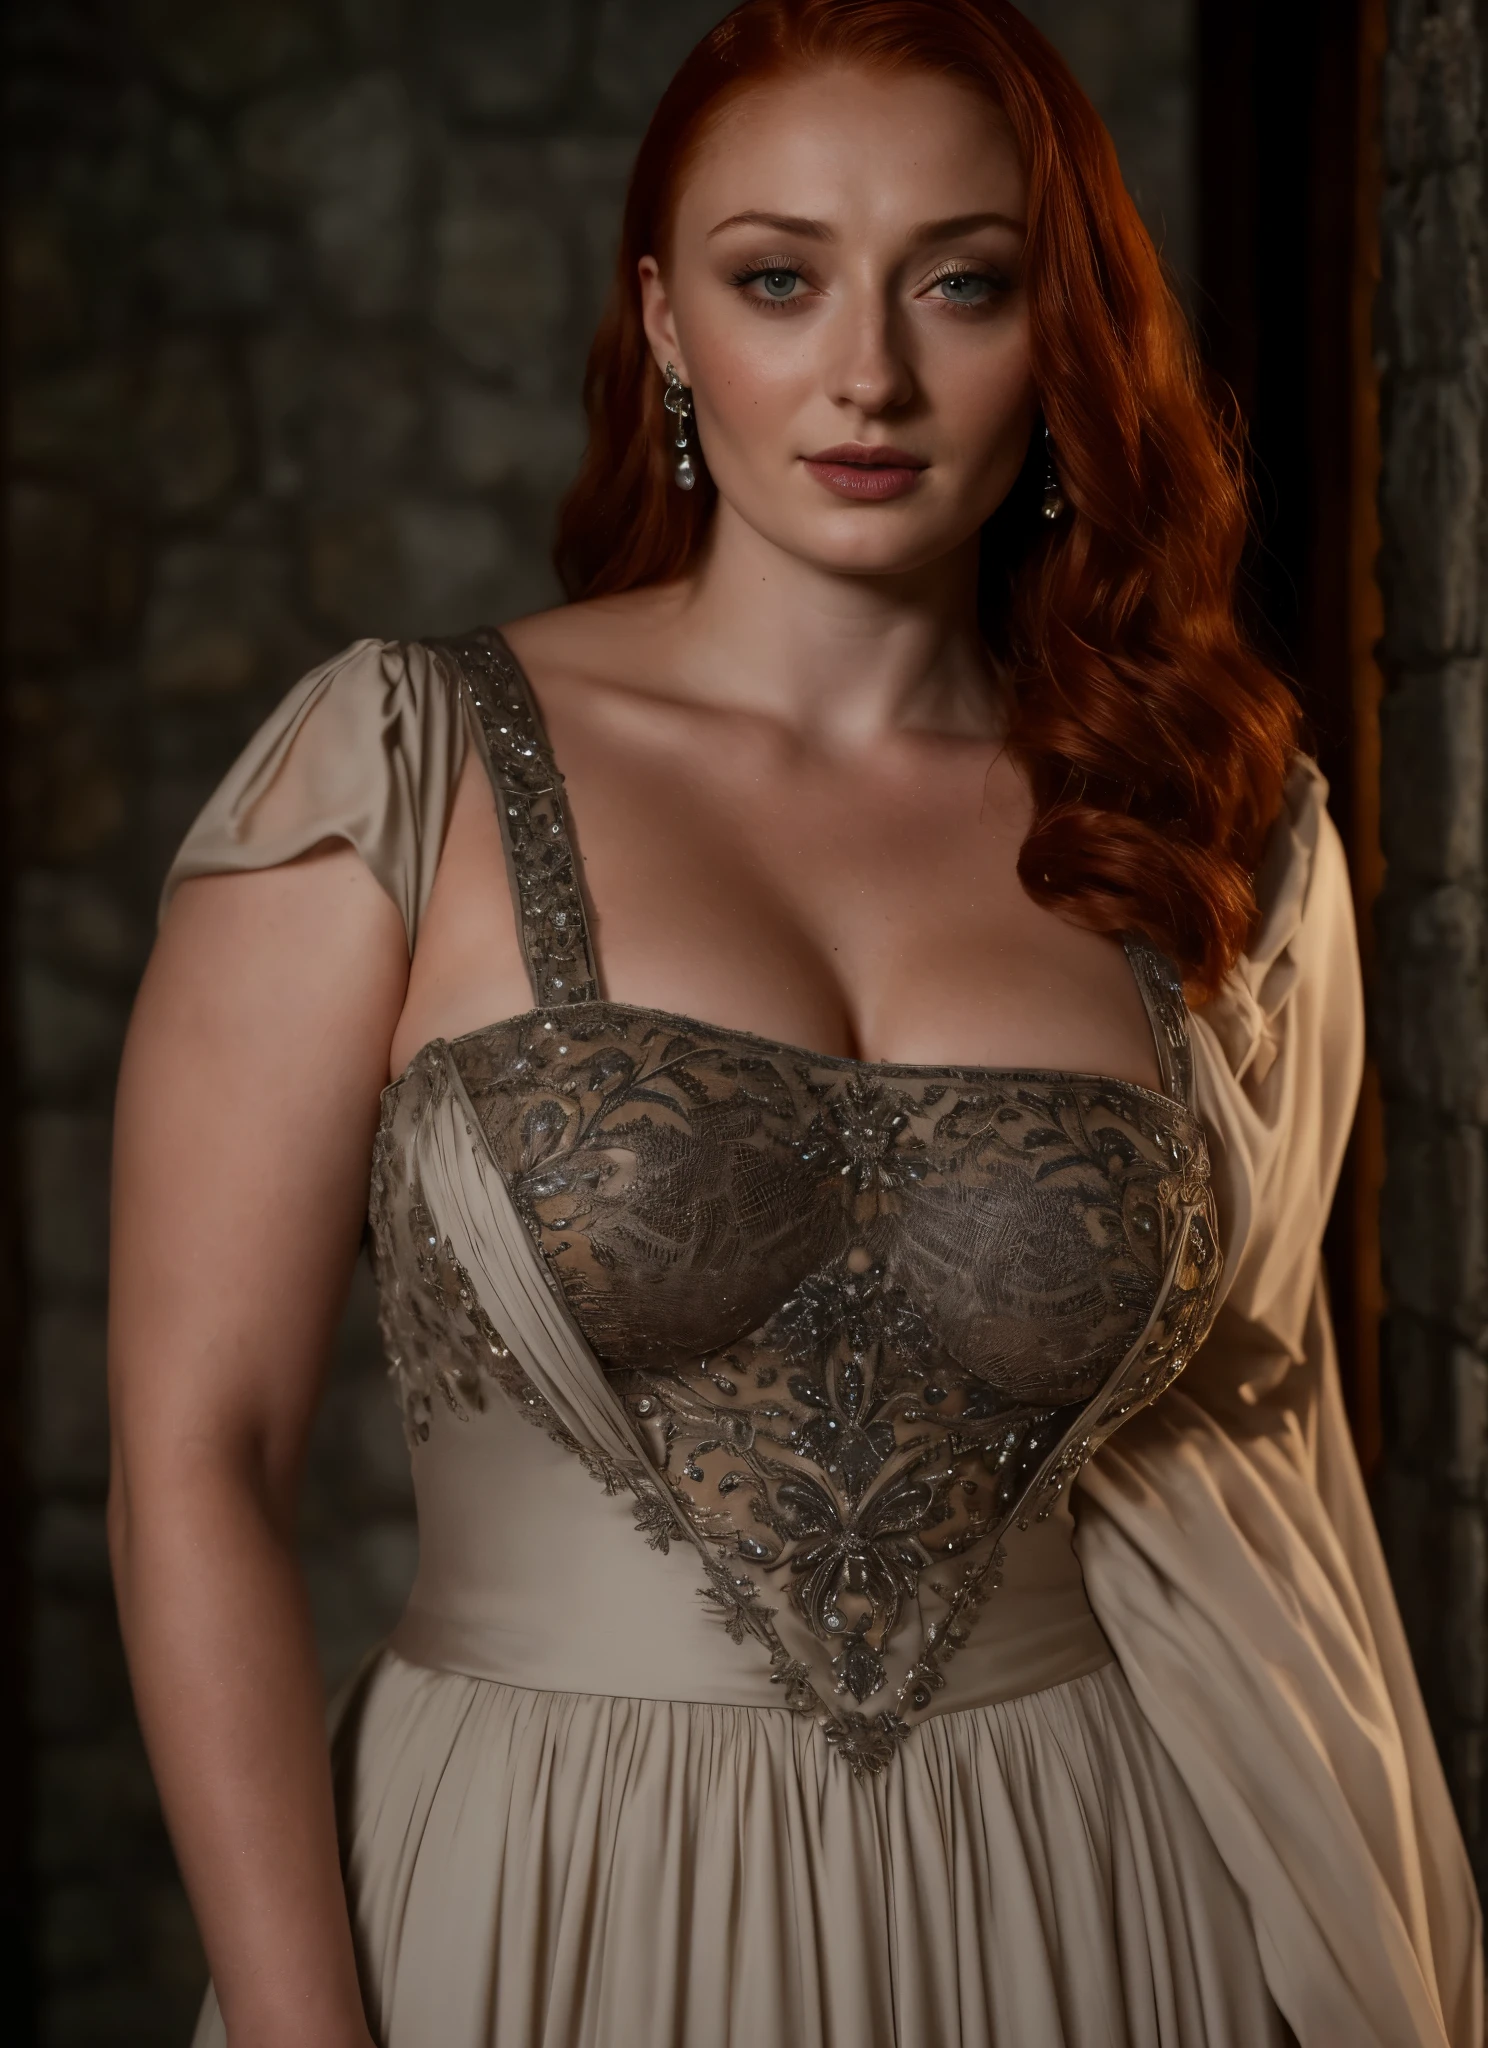 Face of Sophie Turner, Sansa Stark played by Sophie Turner, the de facto Lady of the Eyrie, is a 40-year-old mature queen with a stunning, alluring appearance. Full Face, Full figured woman, pierced eyes, reddish lips, upper body shot, erotic Mediaeval costumes, game of thrones costumes, She wears a Game of Thrones-inspired costume and has a deep cleavage, a perfect thick body, and a perfect thick figure. The photograph captures her in a close-up, with her skin texture and facial features being ultra-realistic and realistic. Juicy thick figure, high quality skin, Skin pores, amazing details, snow, snow flakes, semi realistic, extremely detailed eyes, dark moody orange and black settings, cool environment, artificial intelligence